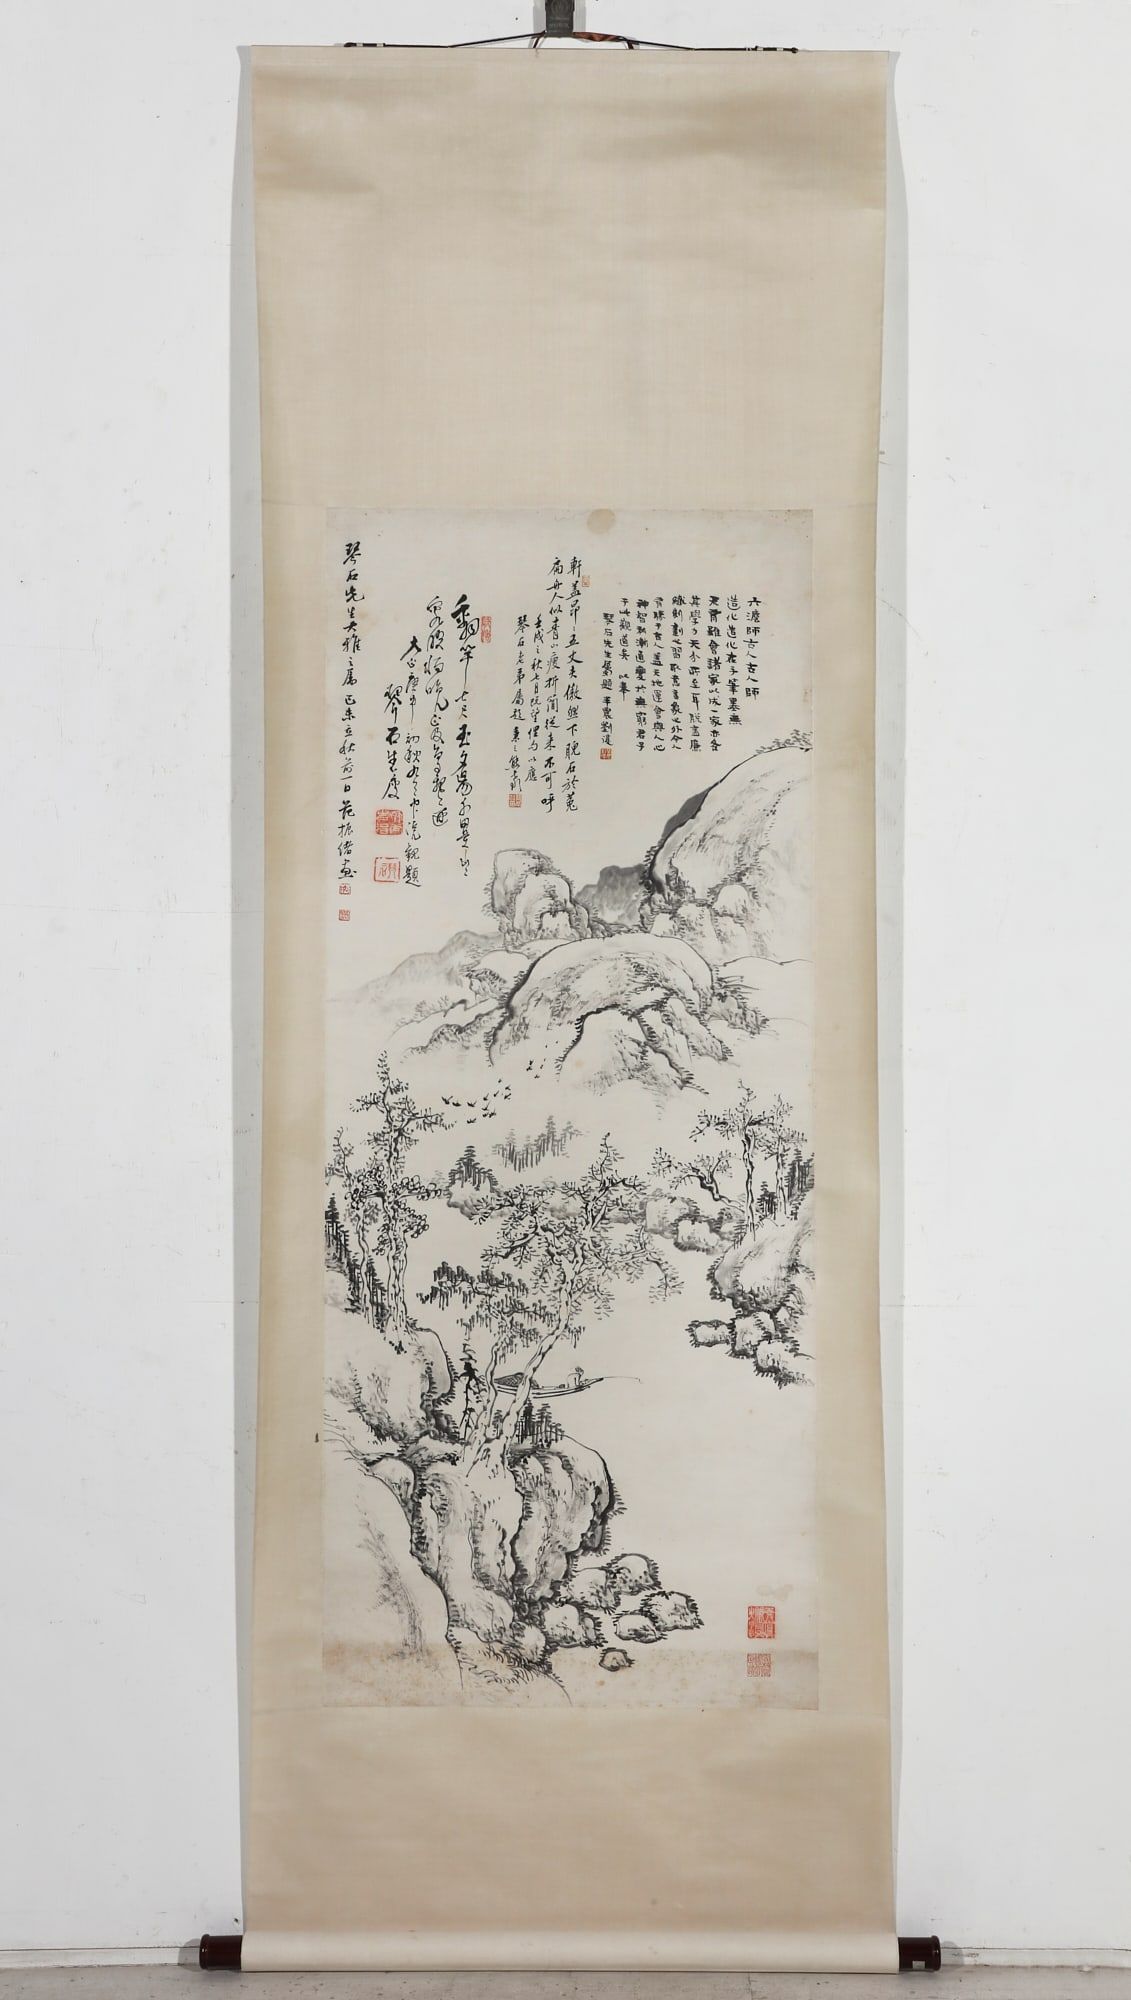 A CHINESE SCROLL DEPICTING A LANDSCAPEA